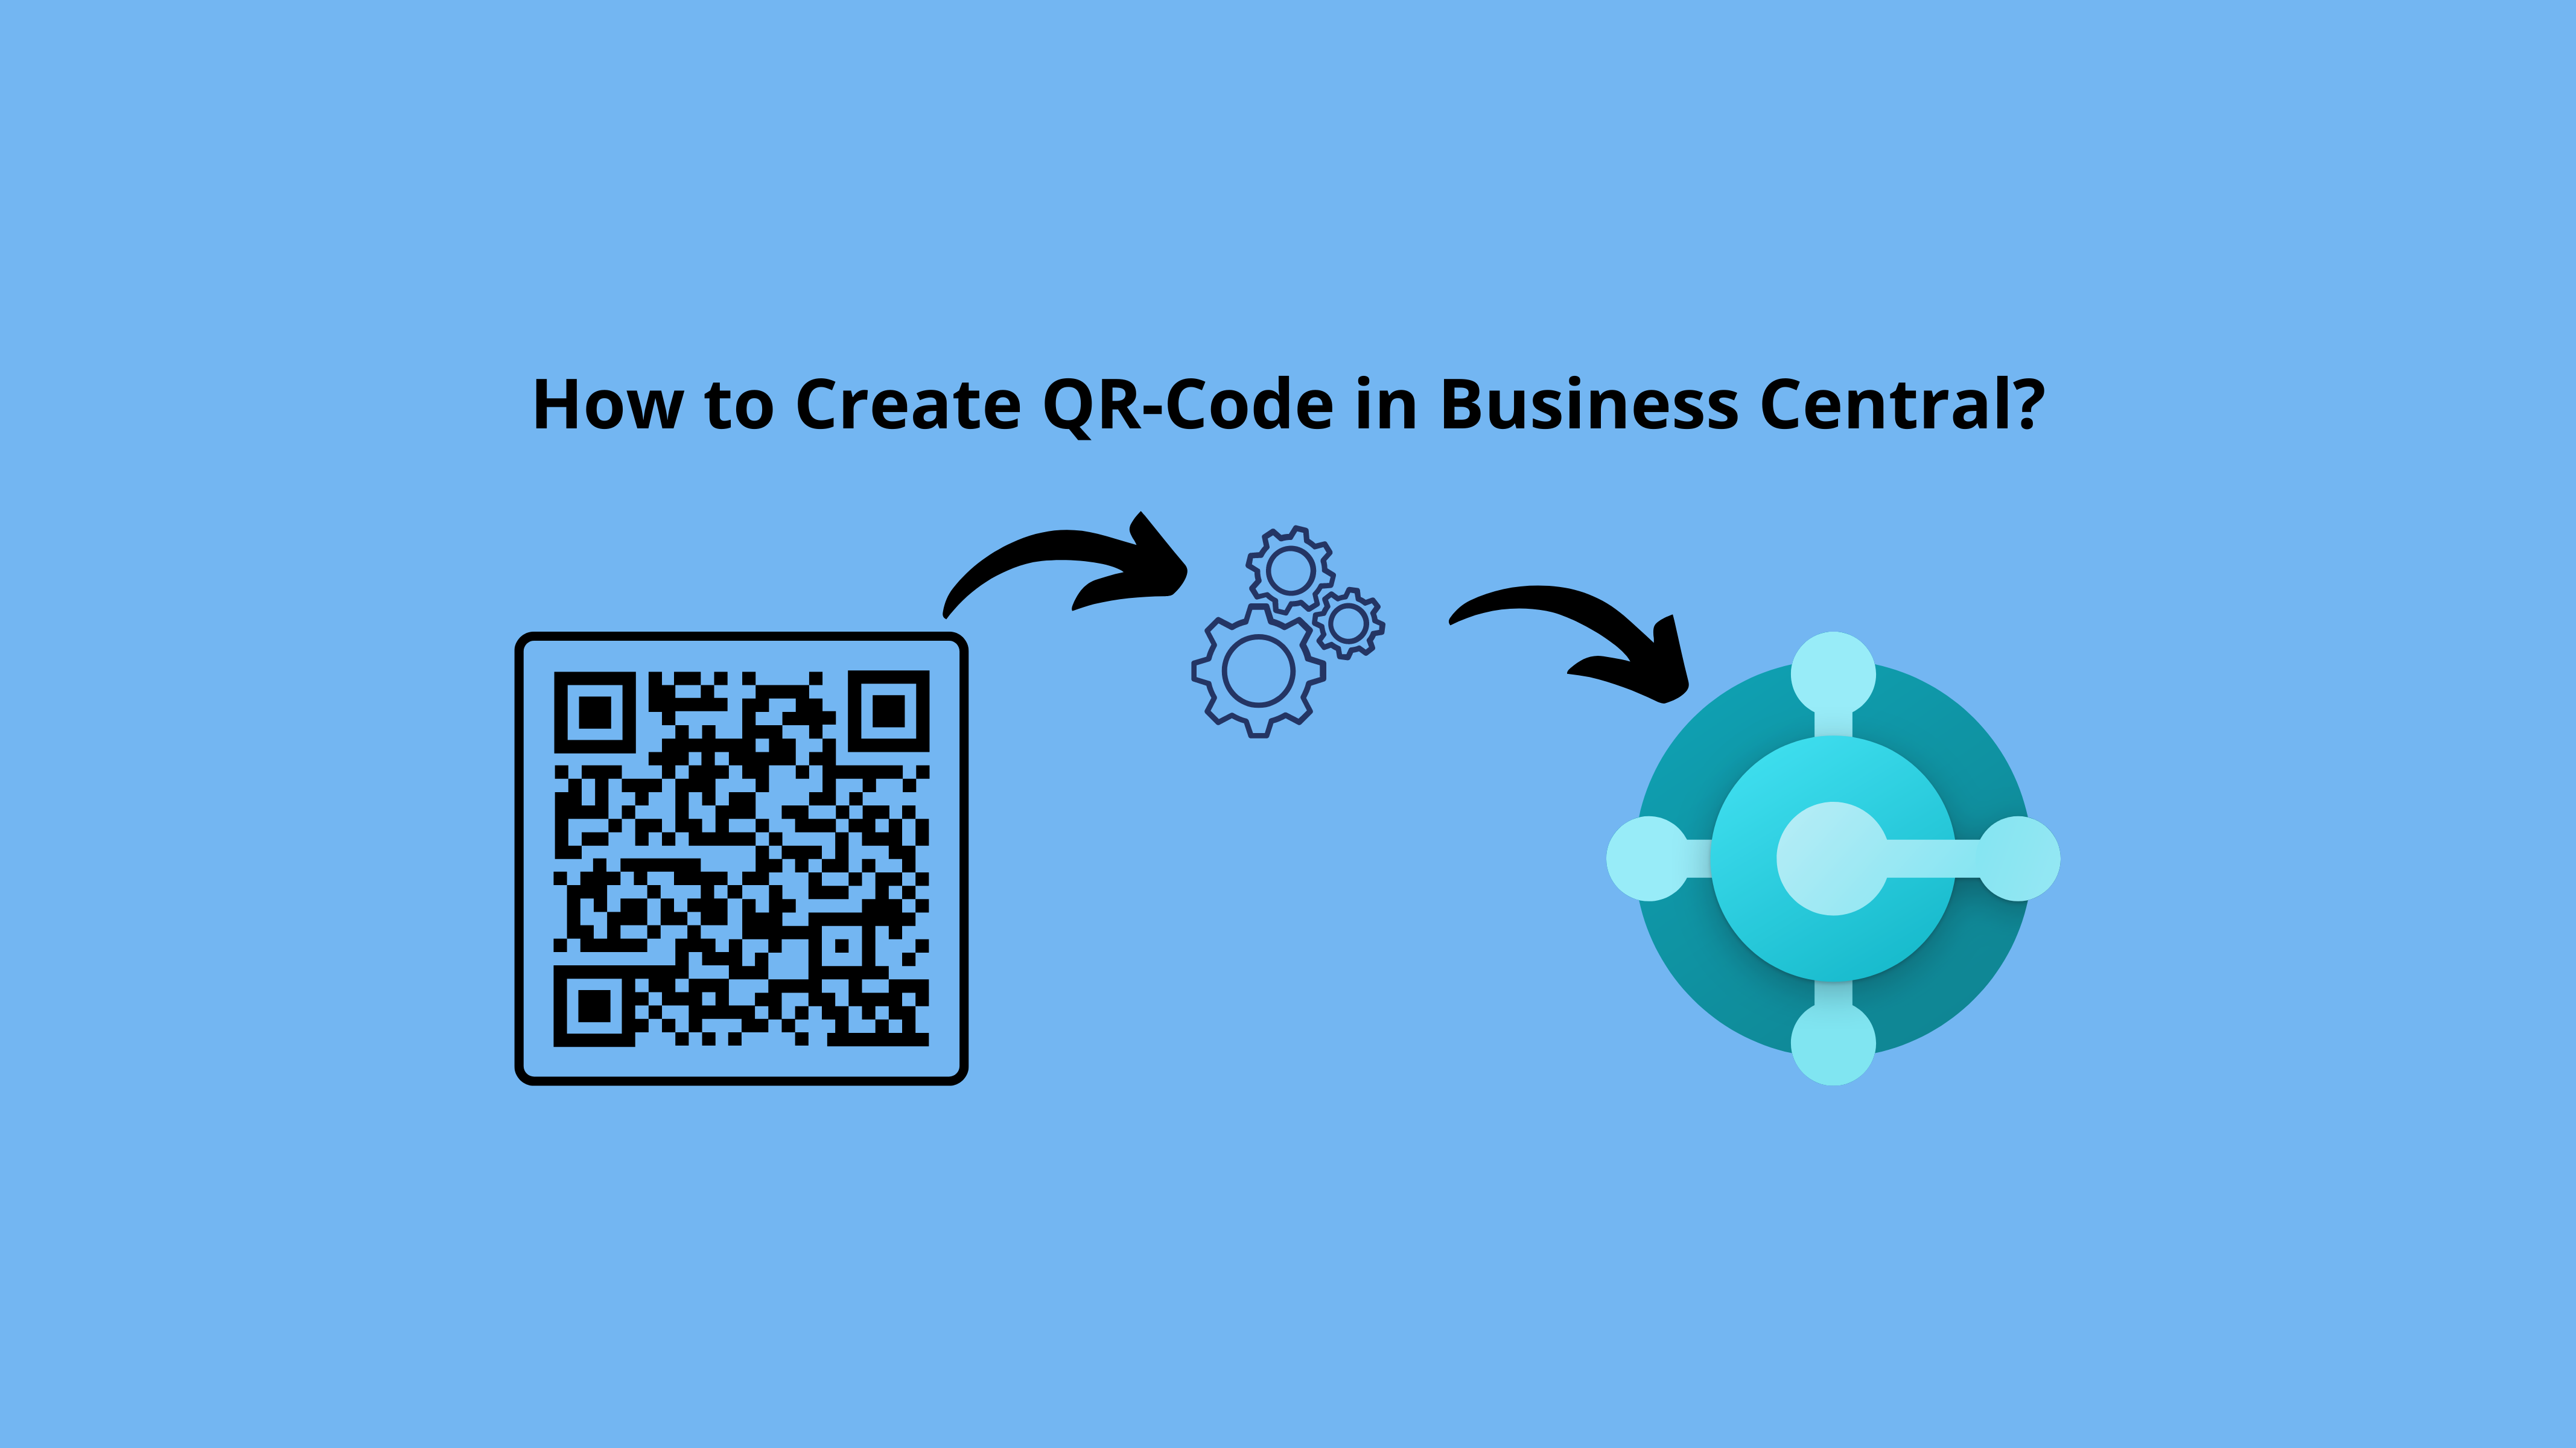 How to Create QR-Code in Business Central?